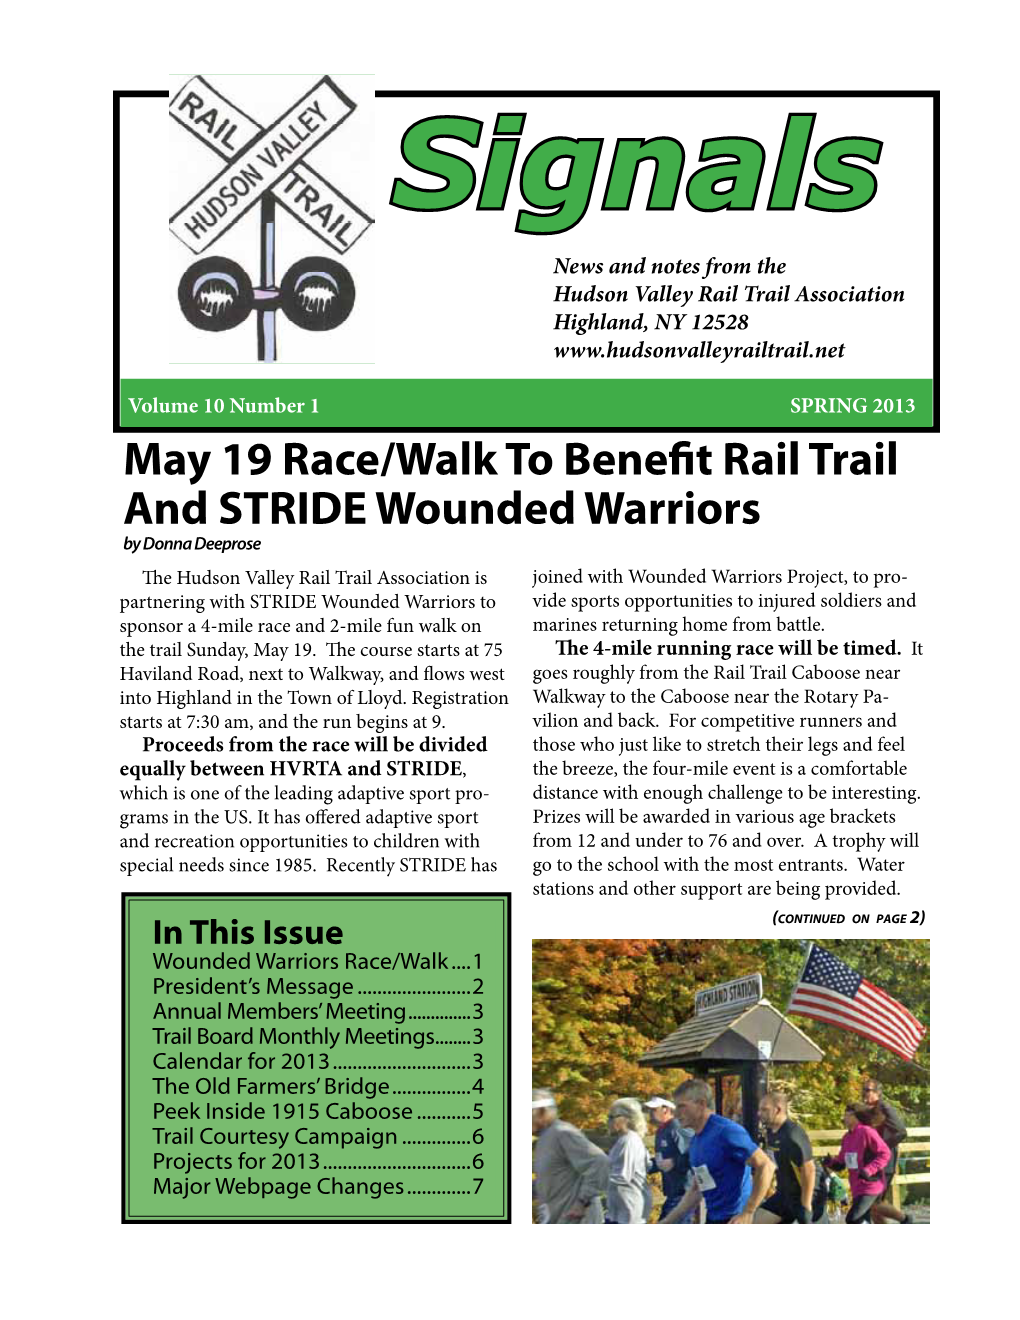 May 19 Race/Walk to Benefit Rail Trail And